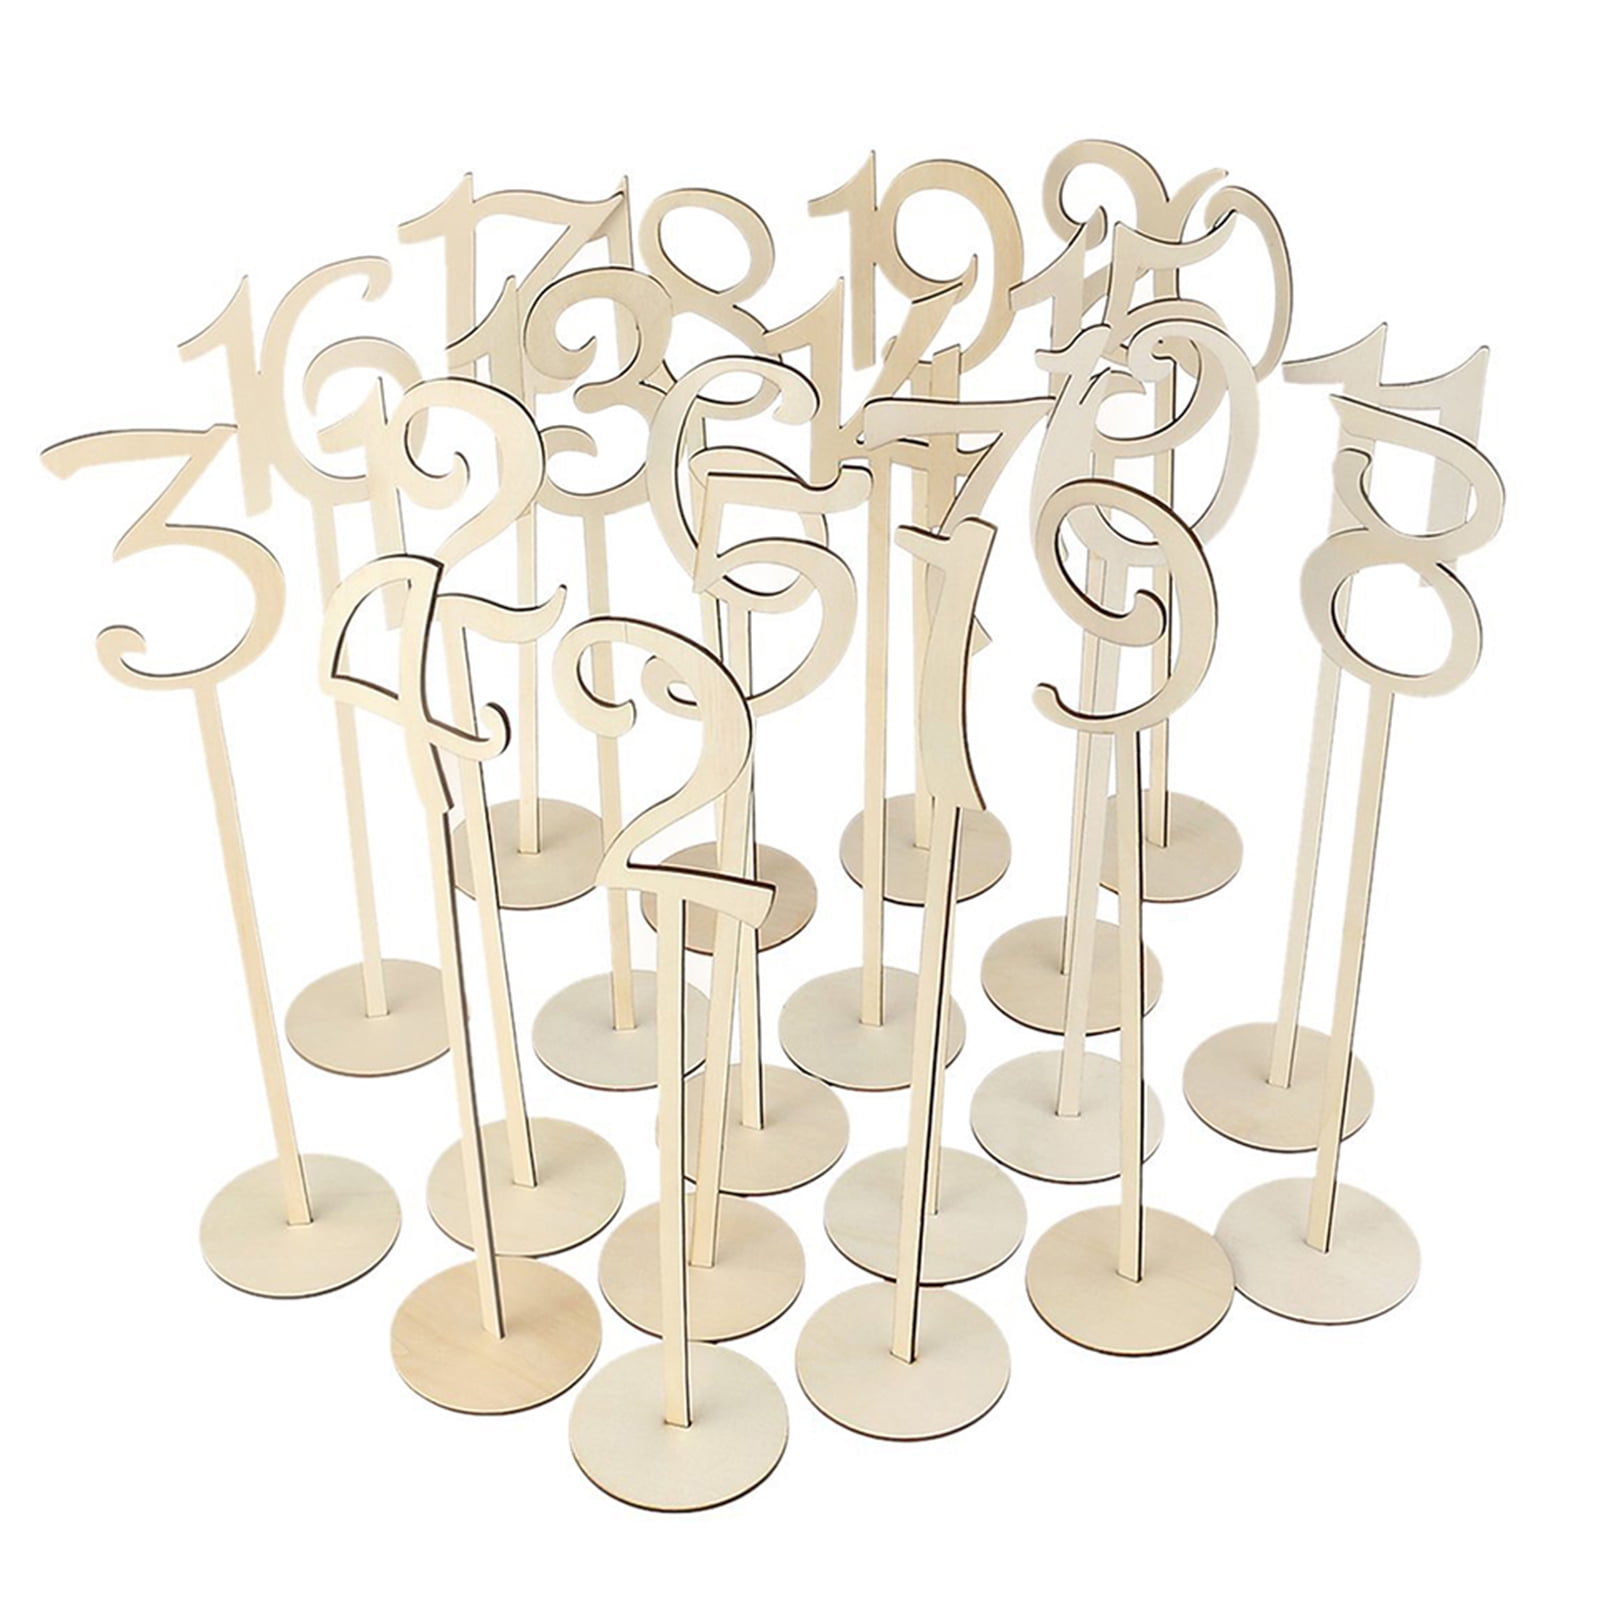 20 Pcs Wood Table Numbers Set 1-20 Number Card Wedding Banquet Table Decor 